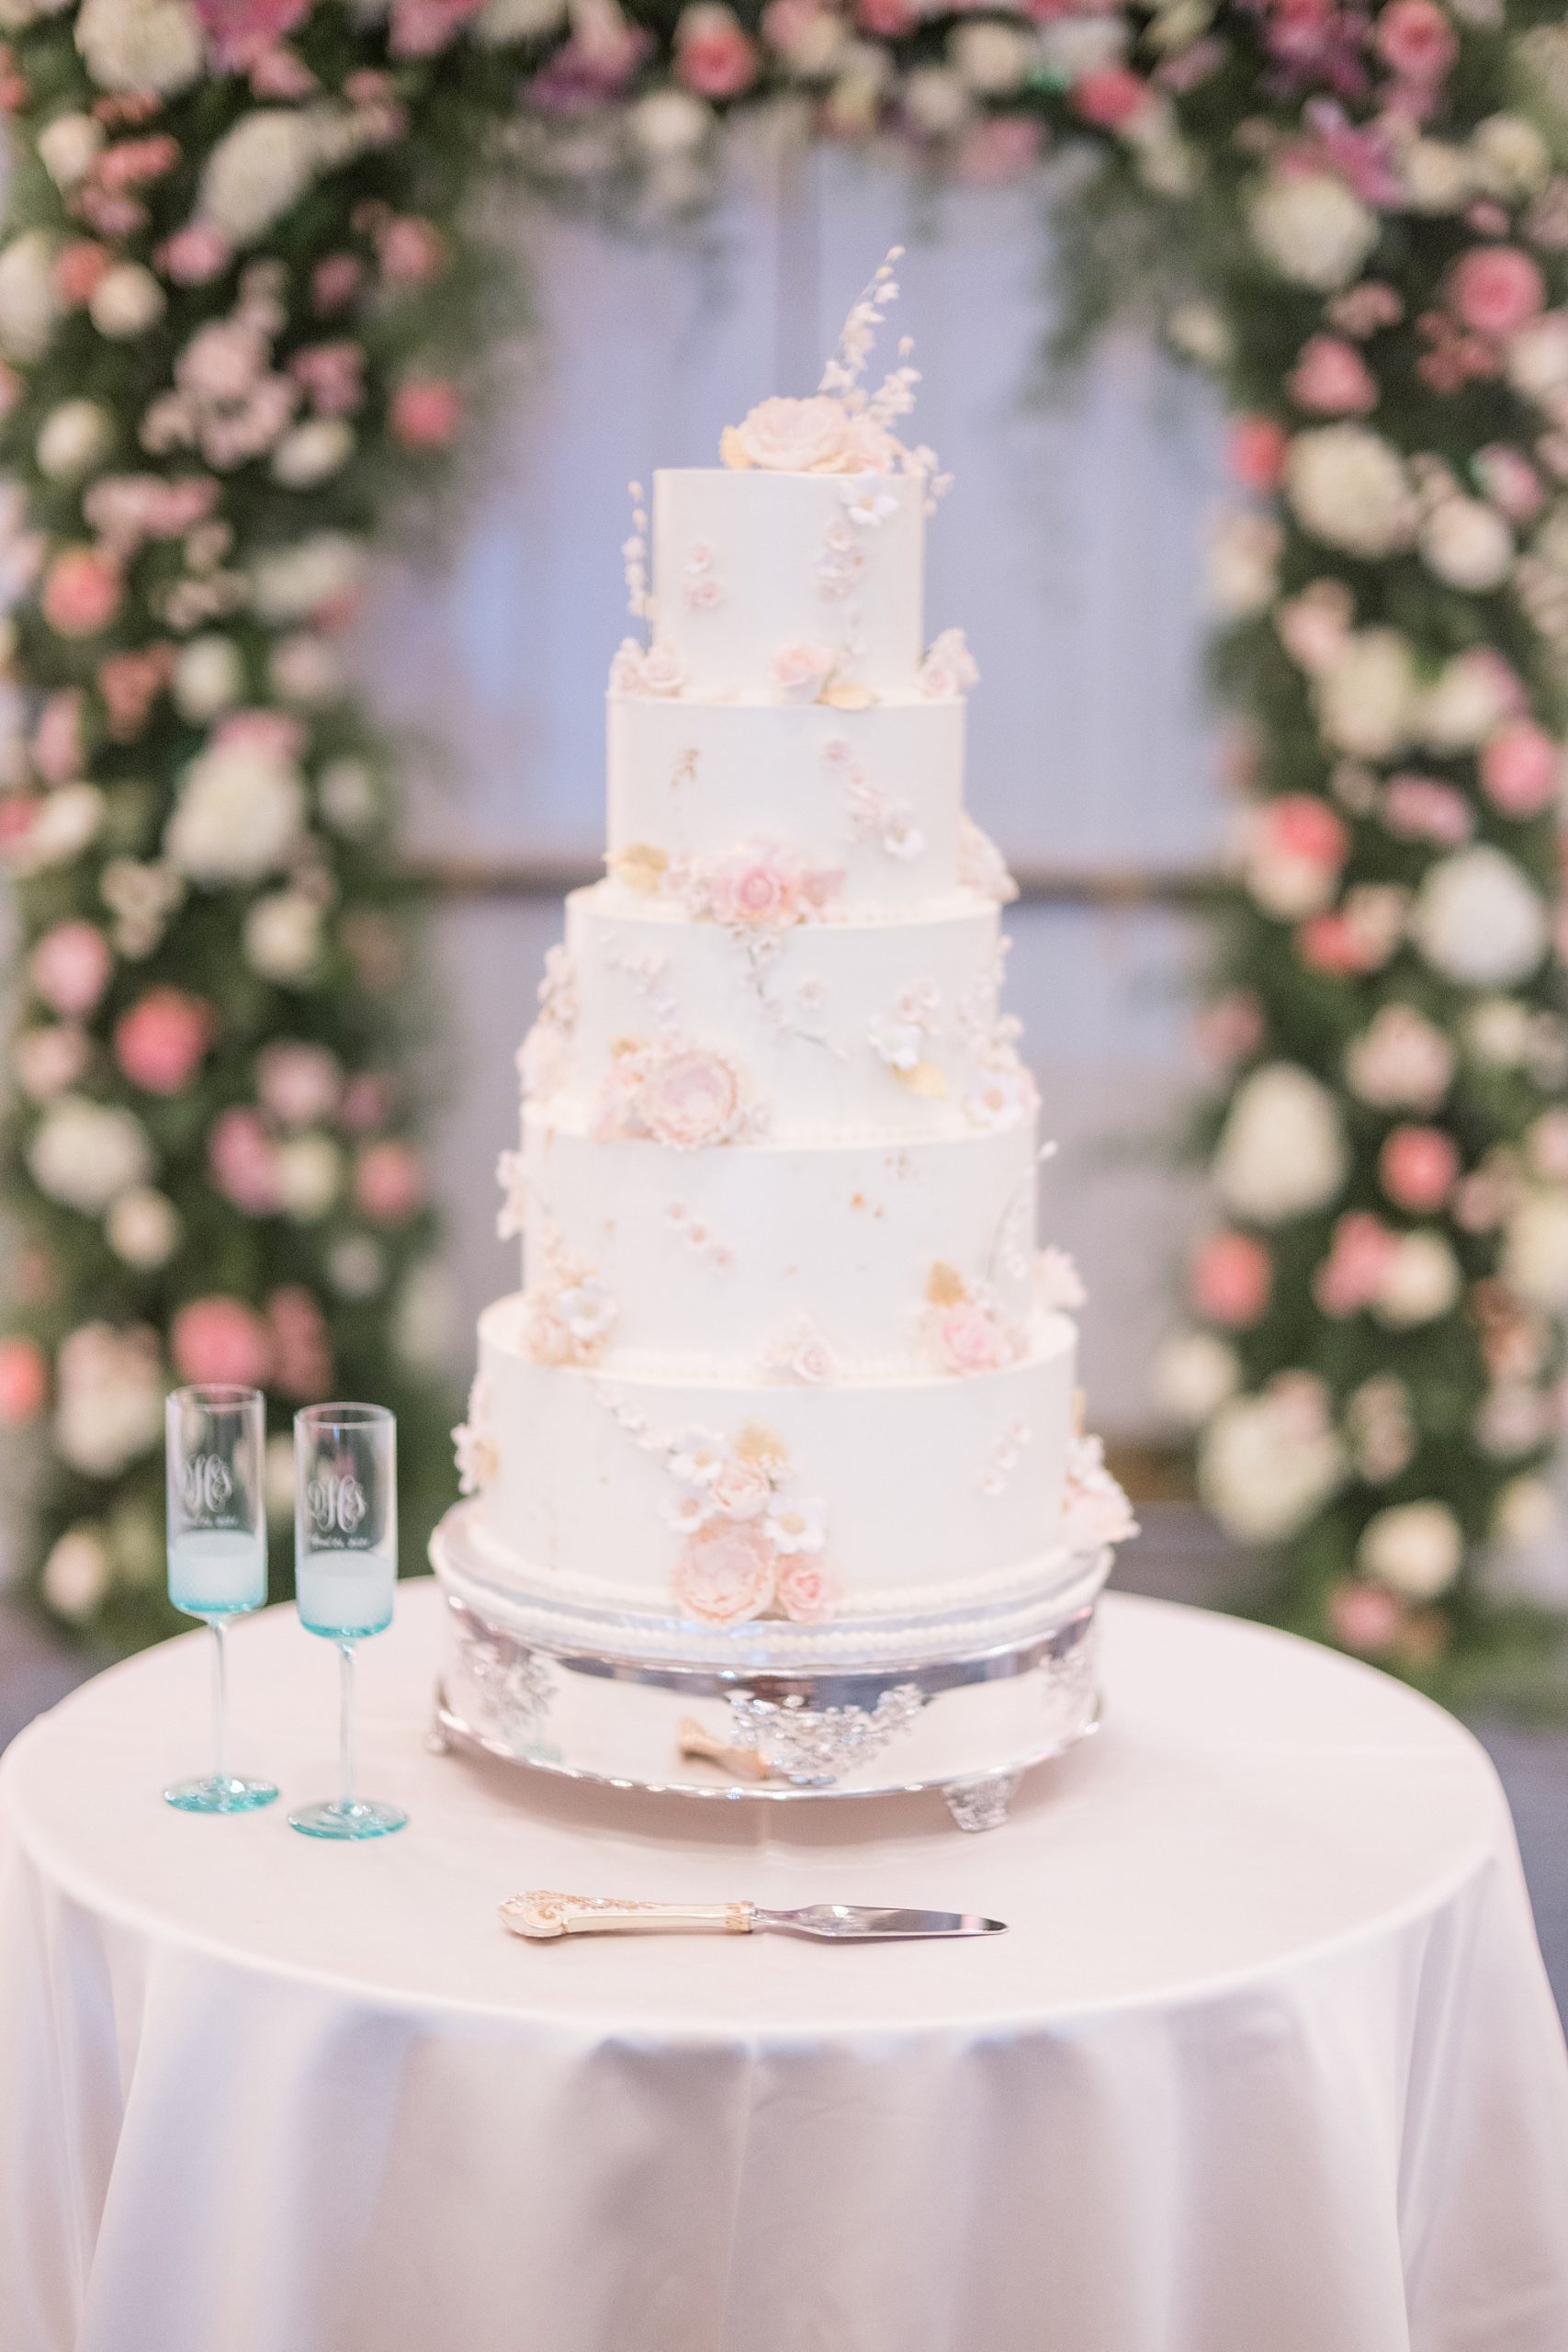 tiered wedding cake with pink floral accents